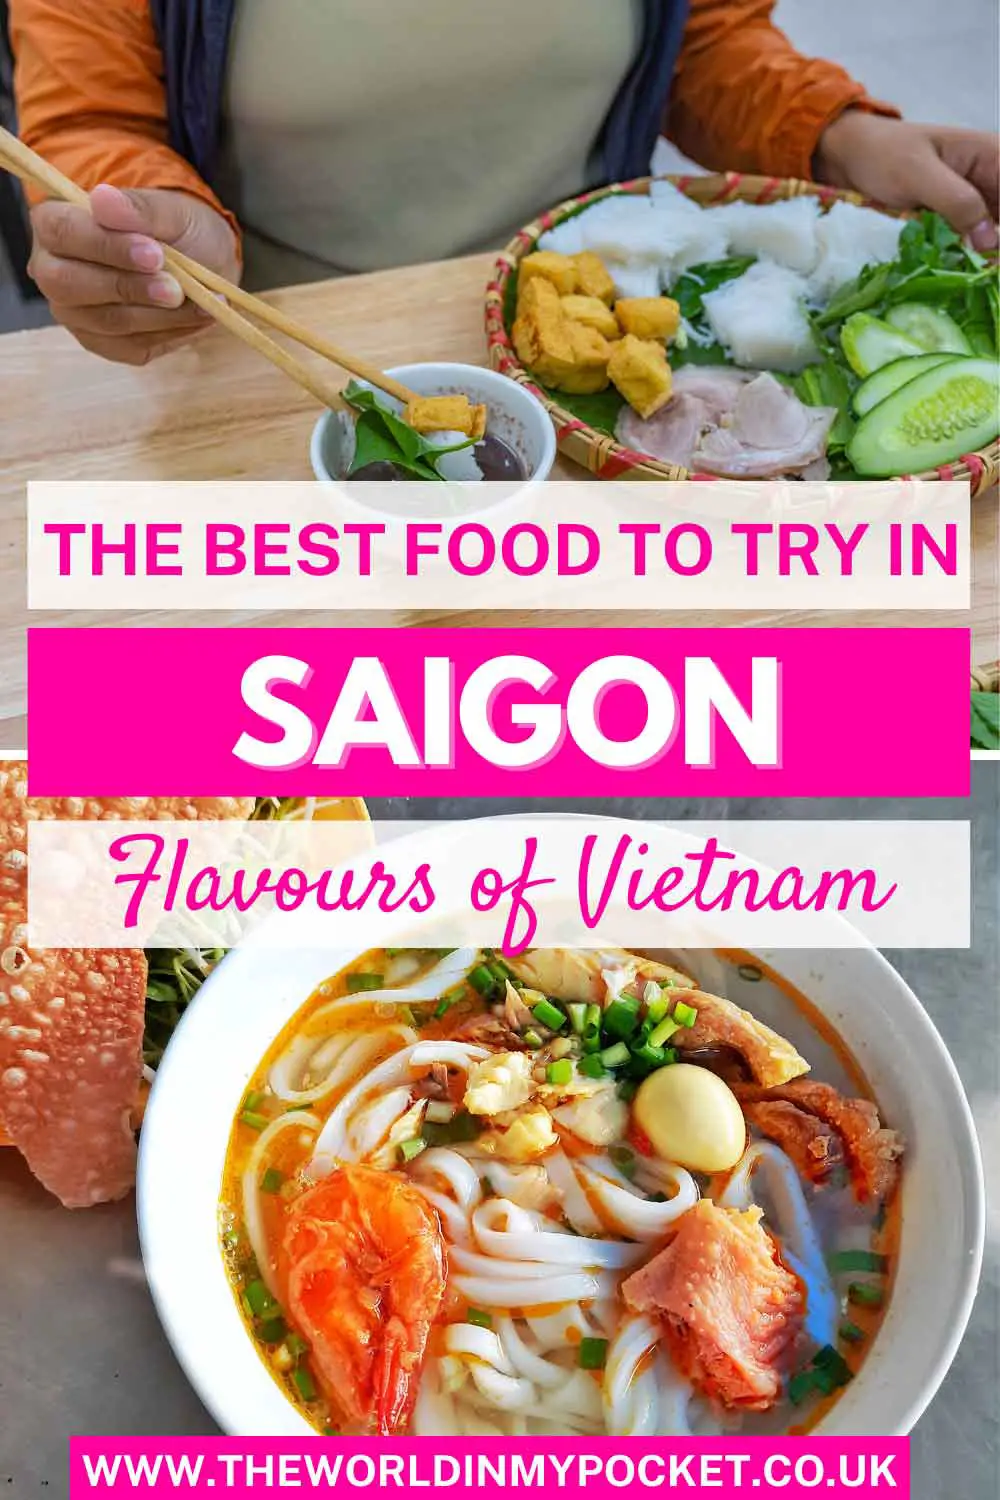 The Food in Saigon: 13 Dishes of Southern Vietnam - The World in My Pocket